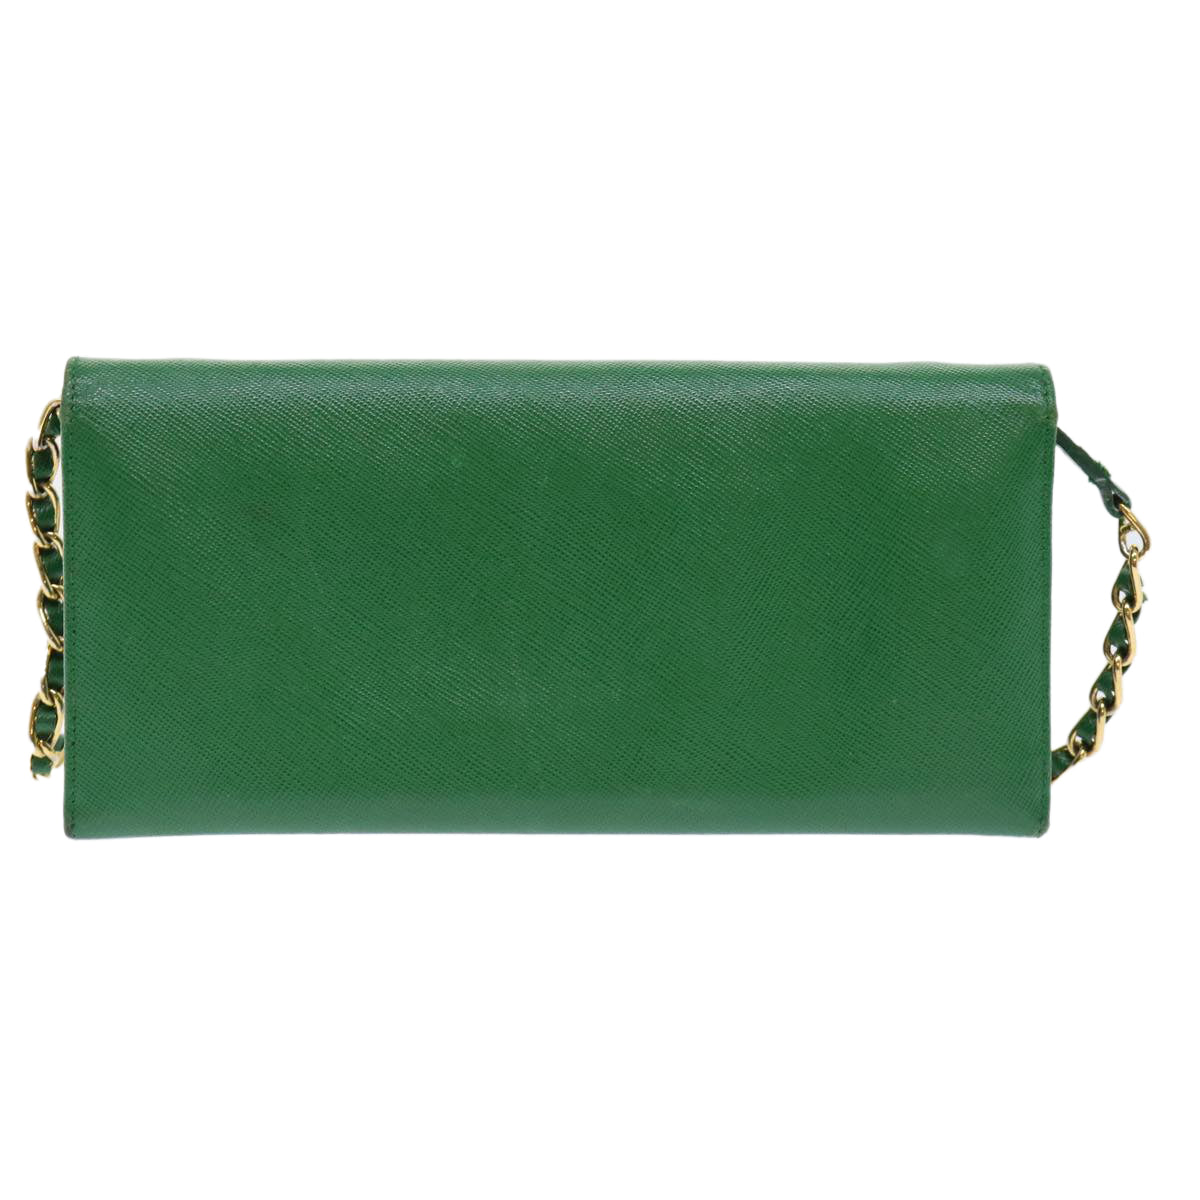 PRADA Shoulder Chain Wallet Safiano leather Green Auth 52446 - 0